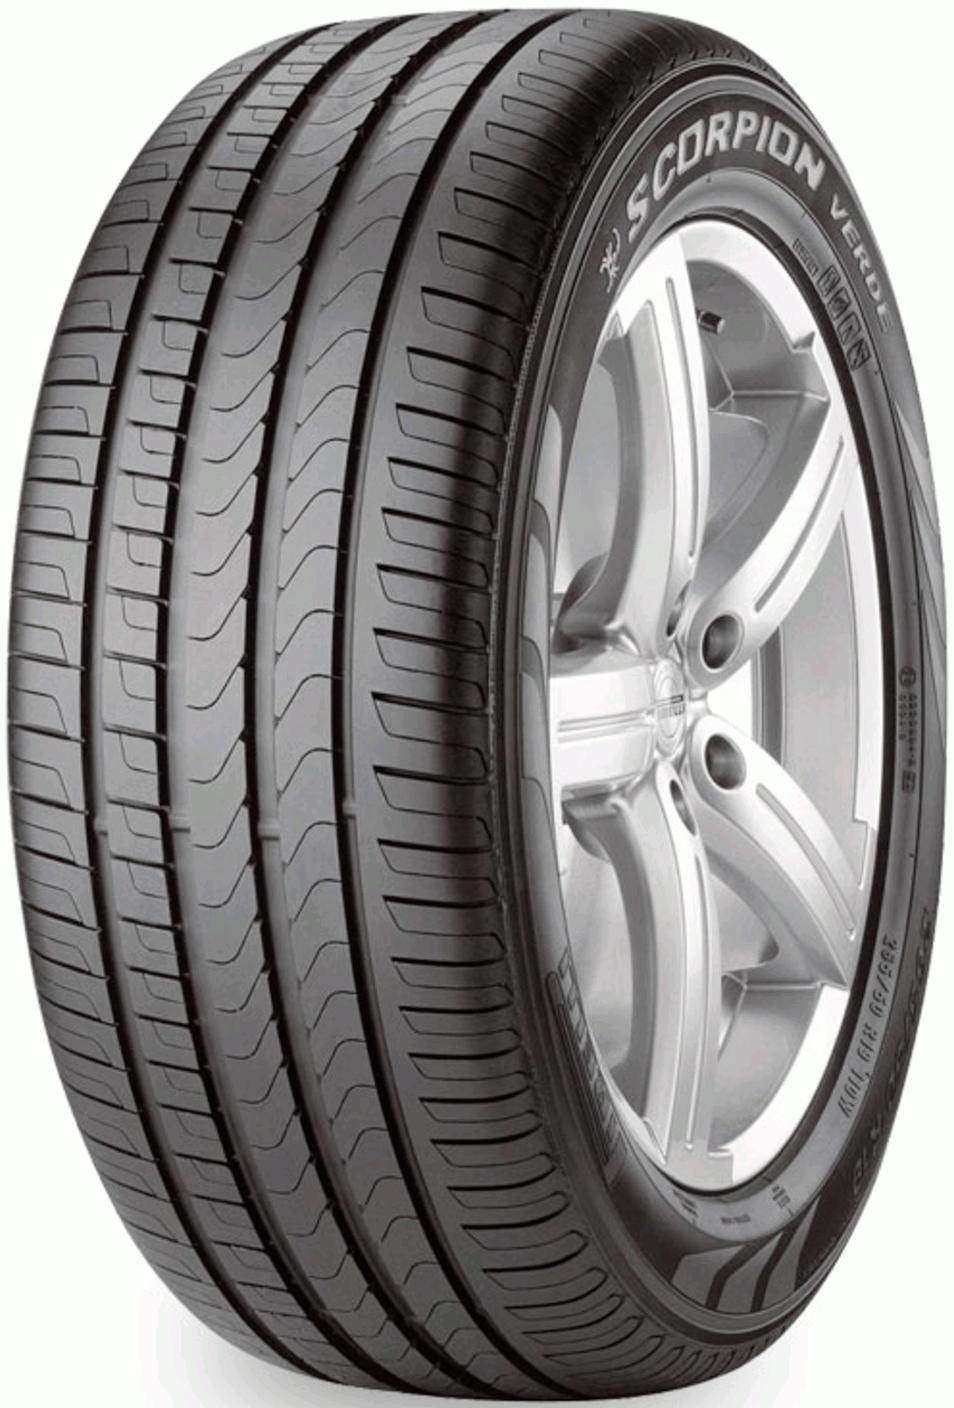 Reviews Tire - Tests and Pirelli Verde Scorpion